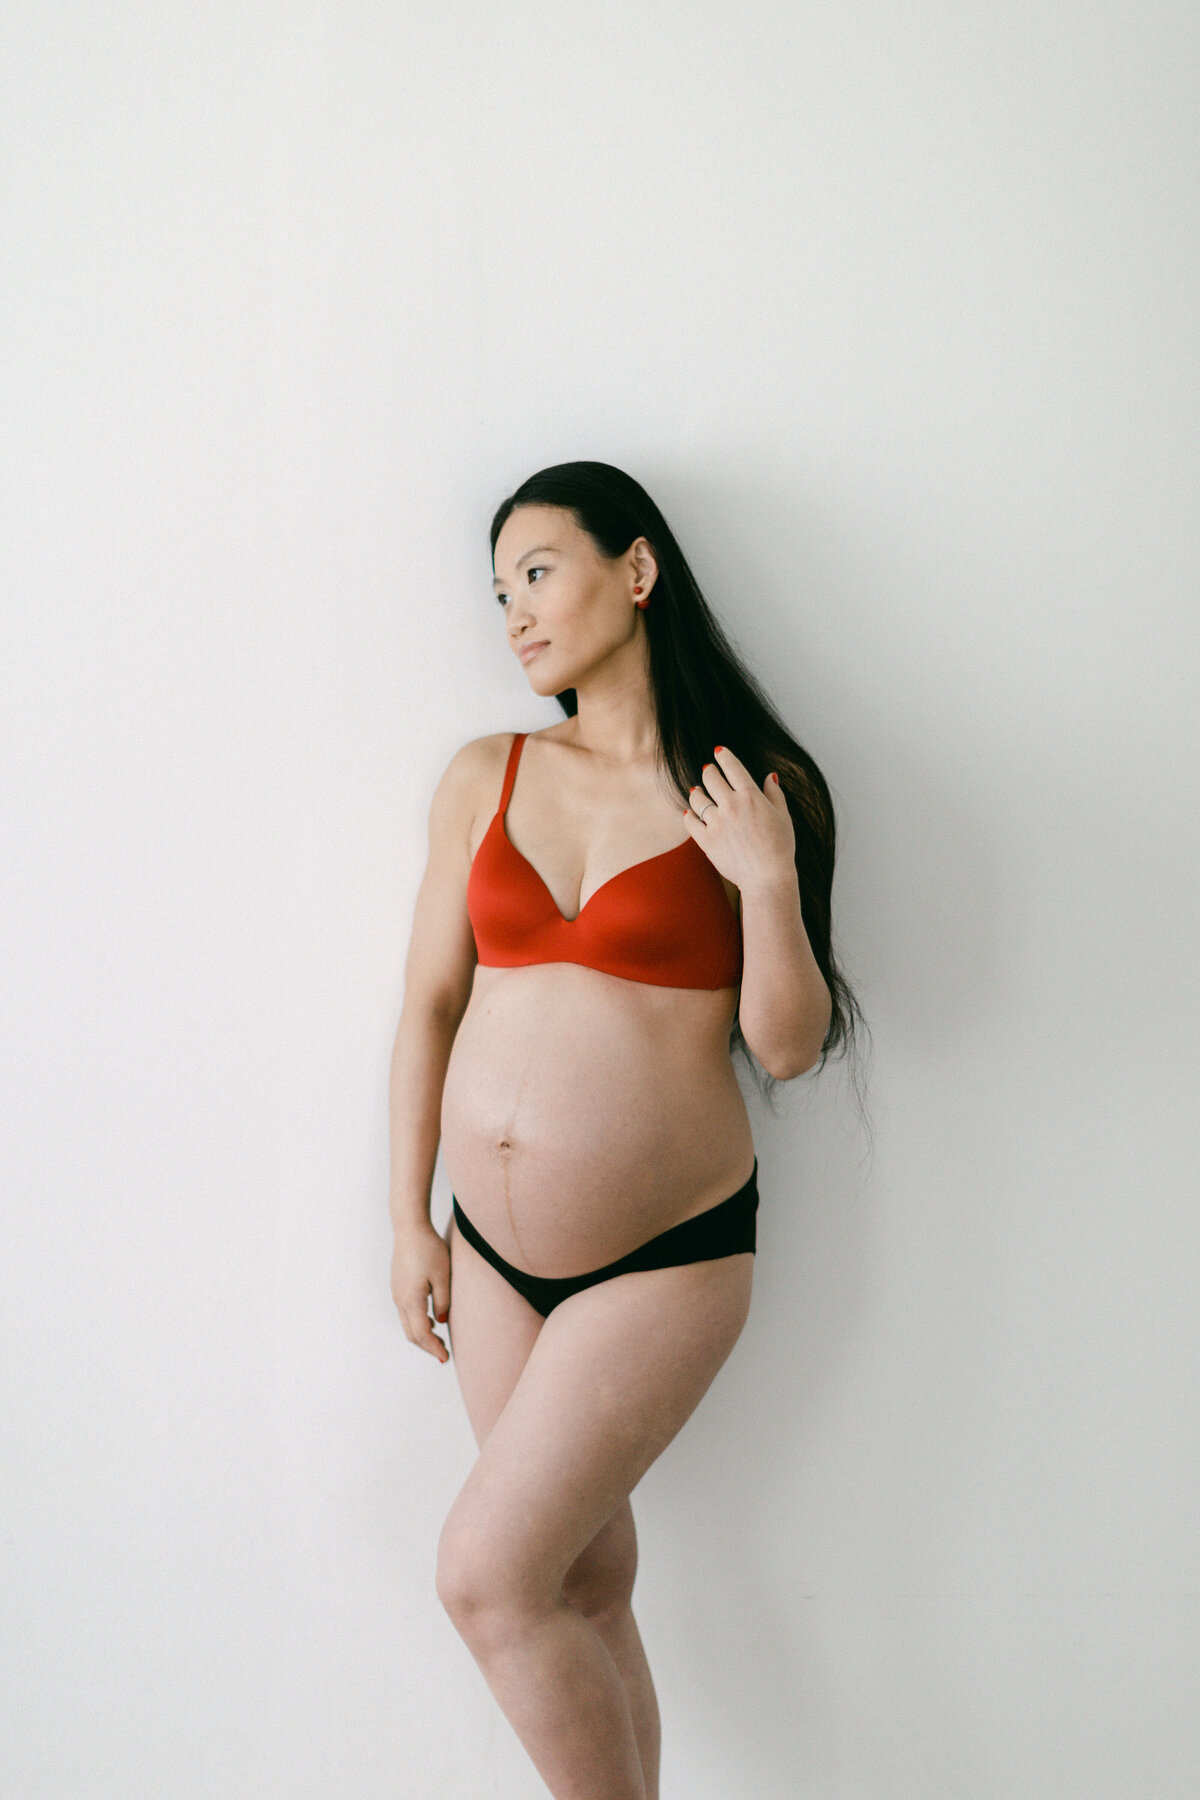 Asian woman in red bra showing her pregnant belly during maternity session